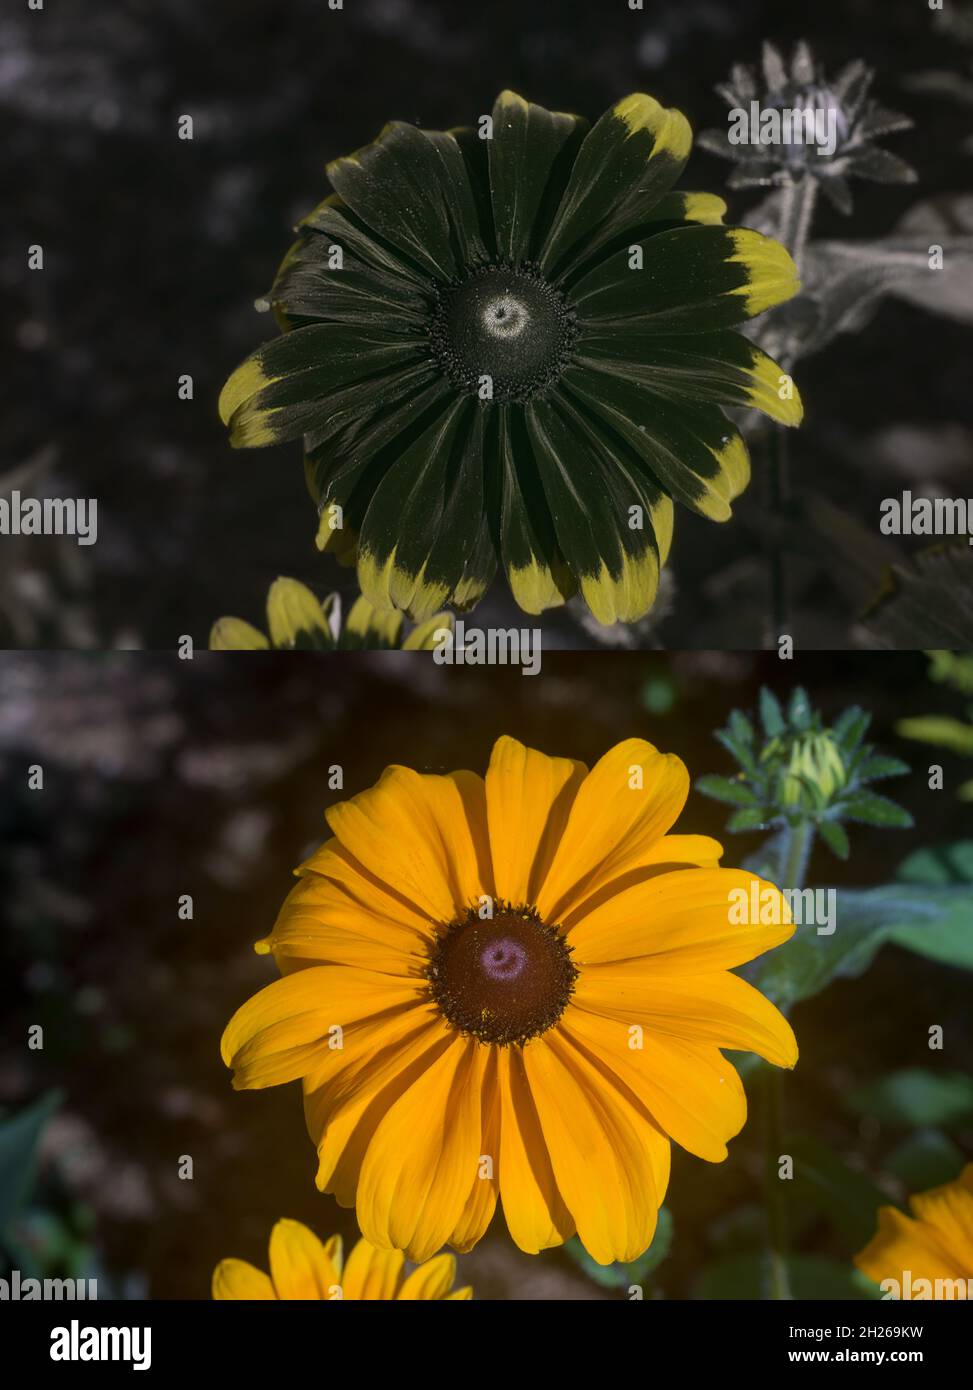 Comparison normal daylight and UV ultraviolet reflected light on sunflower, aster daisy, coneflower rudbeckia showing invisible patterns to humans Stock Photo